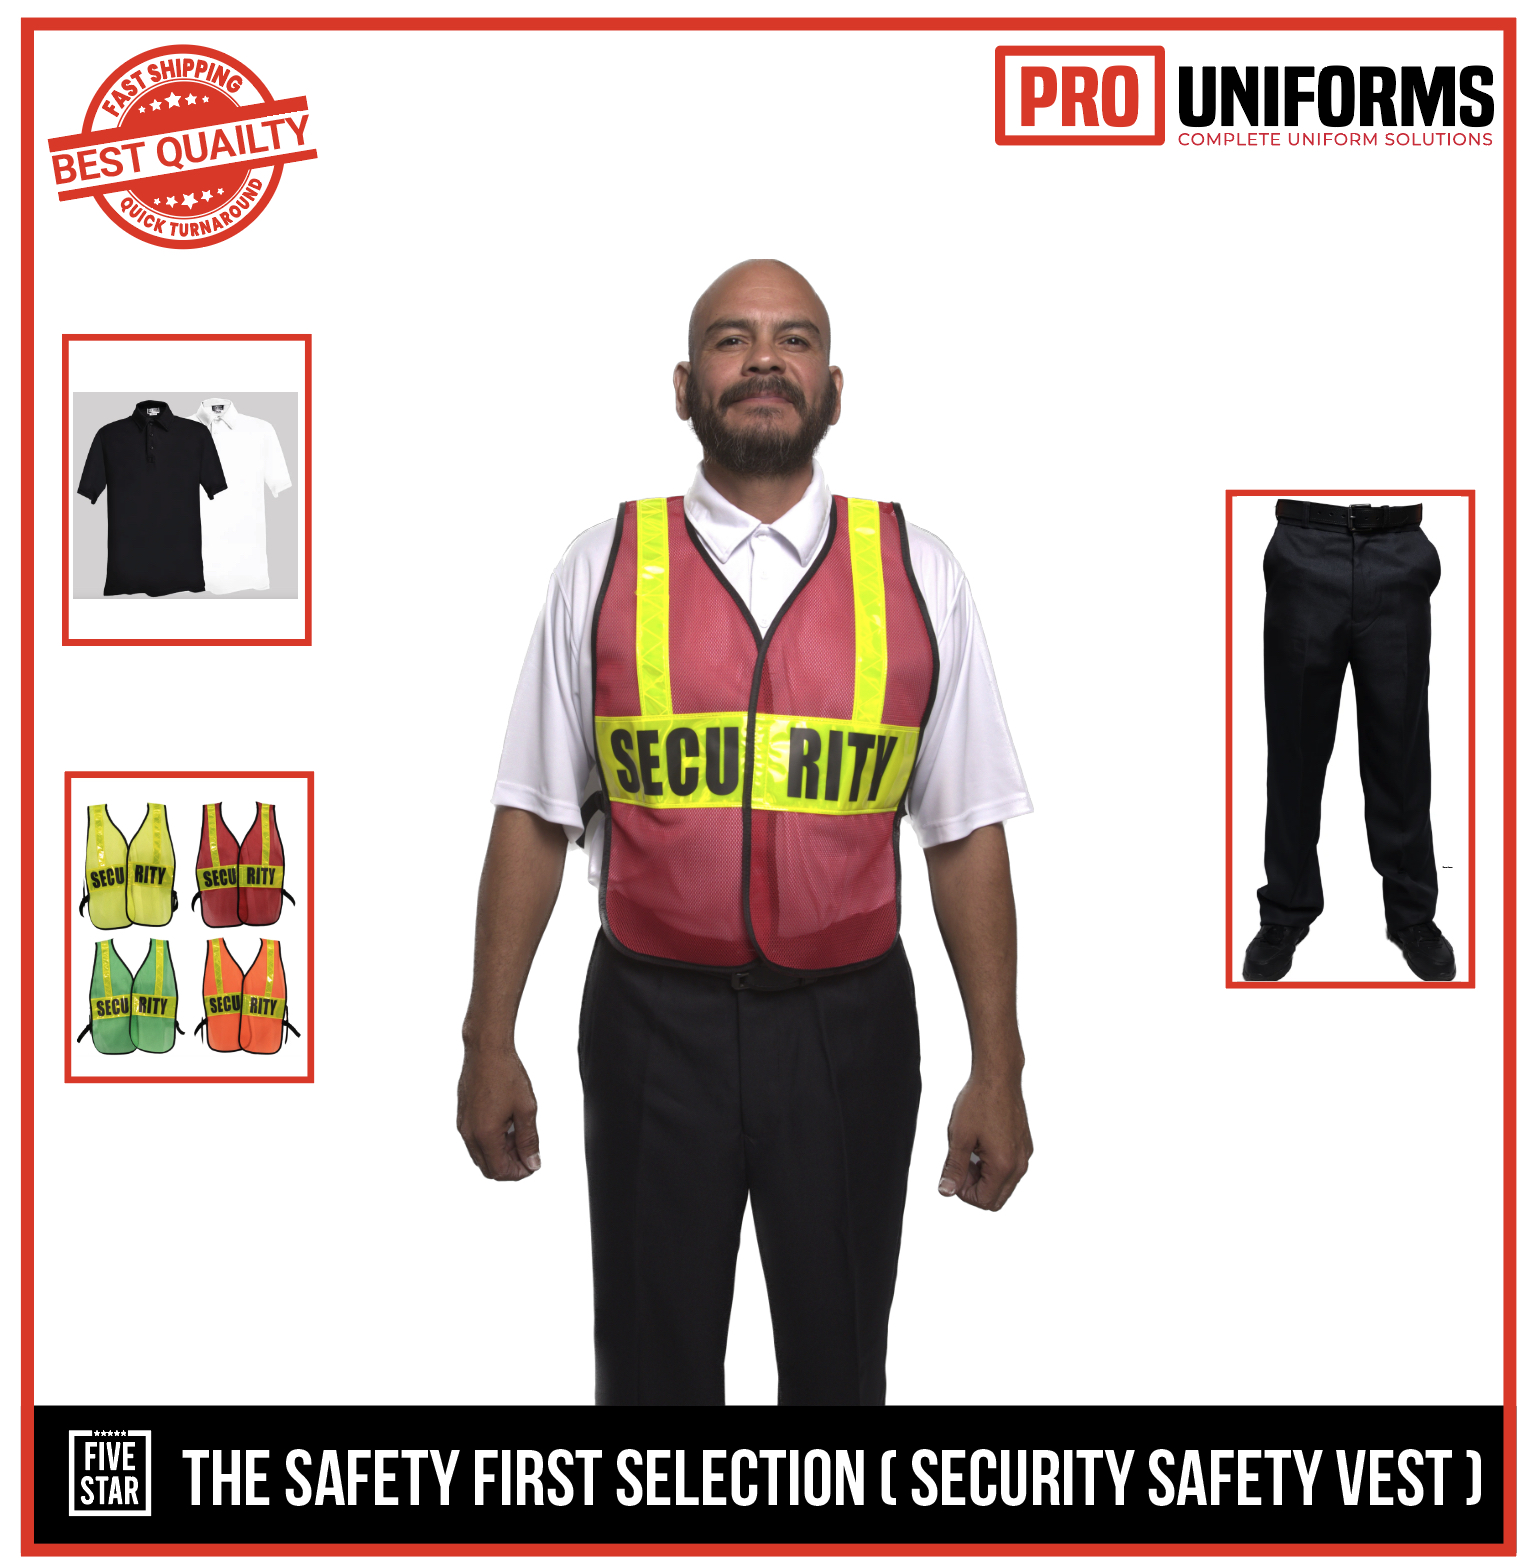 Get an Online First Selection Security Safety Vest